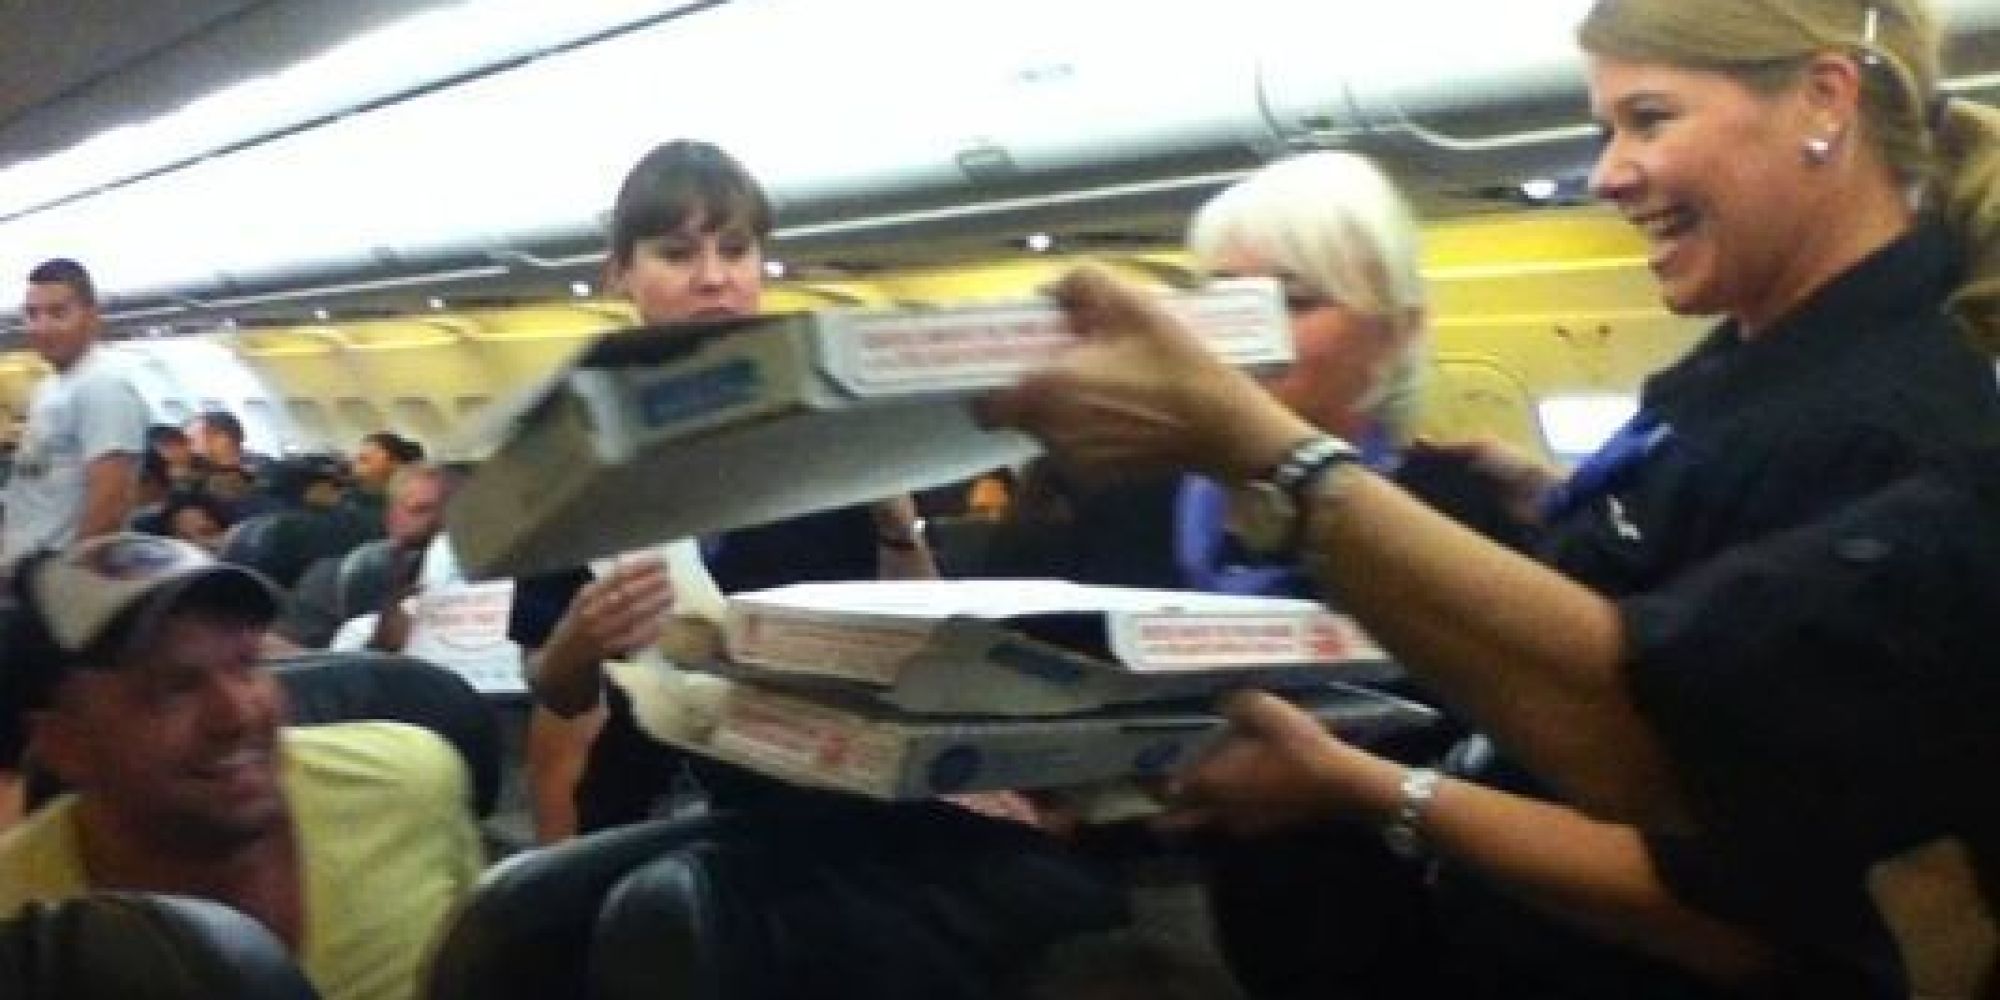 Frontier Airlines Pilot Buys Pizzas On Own Dime For Stranded